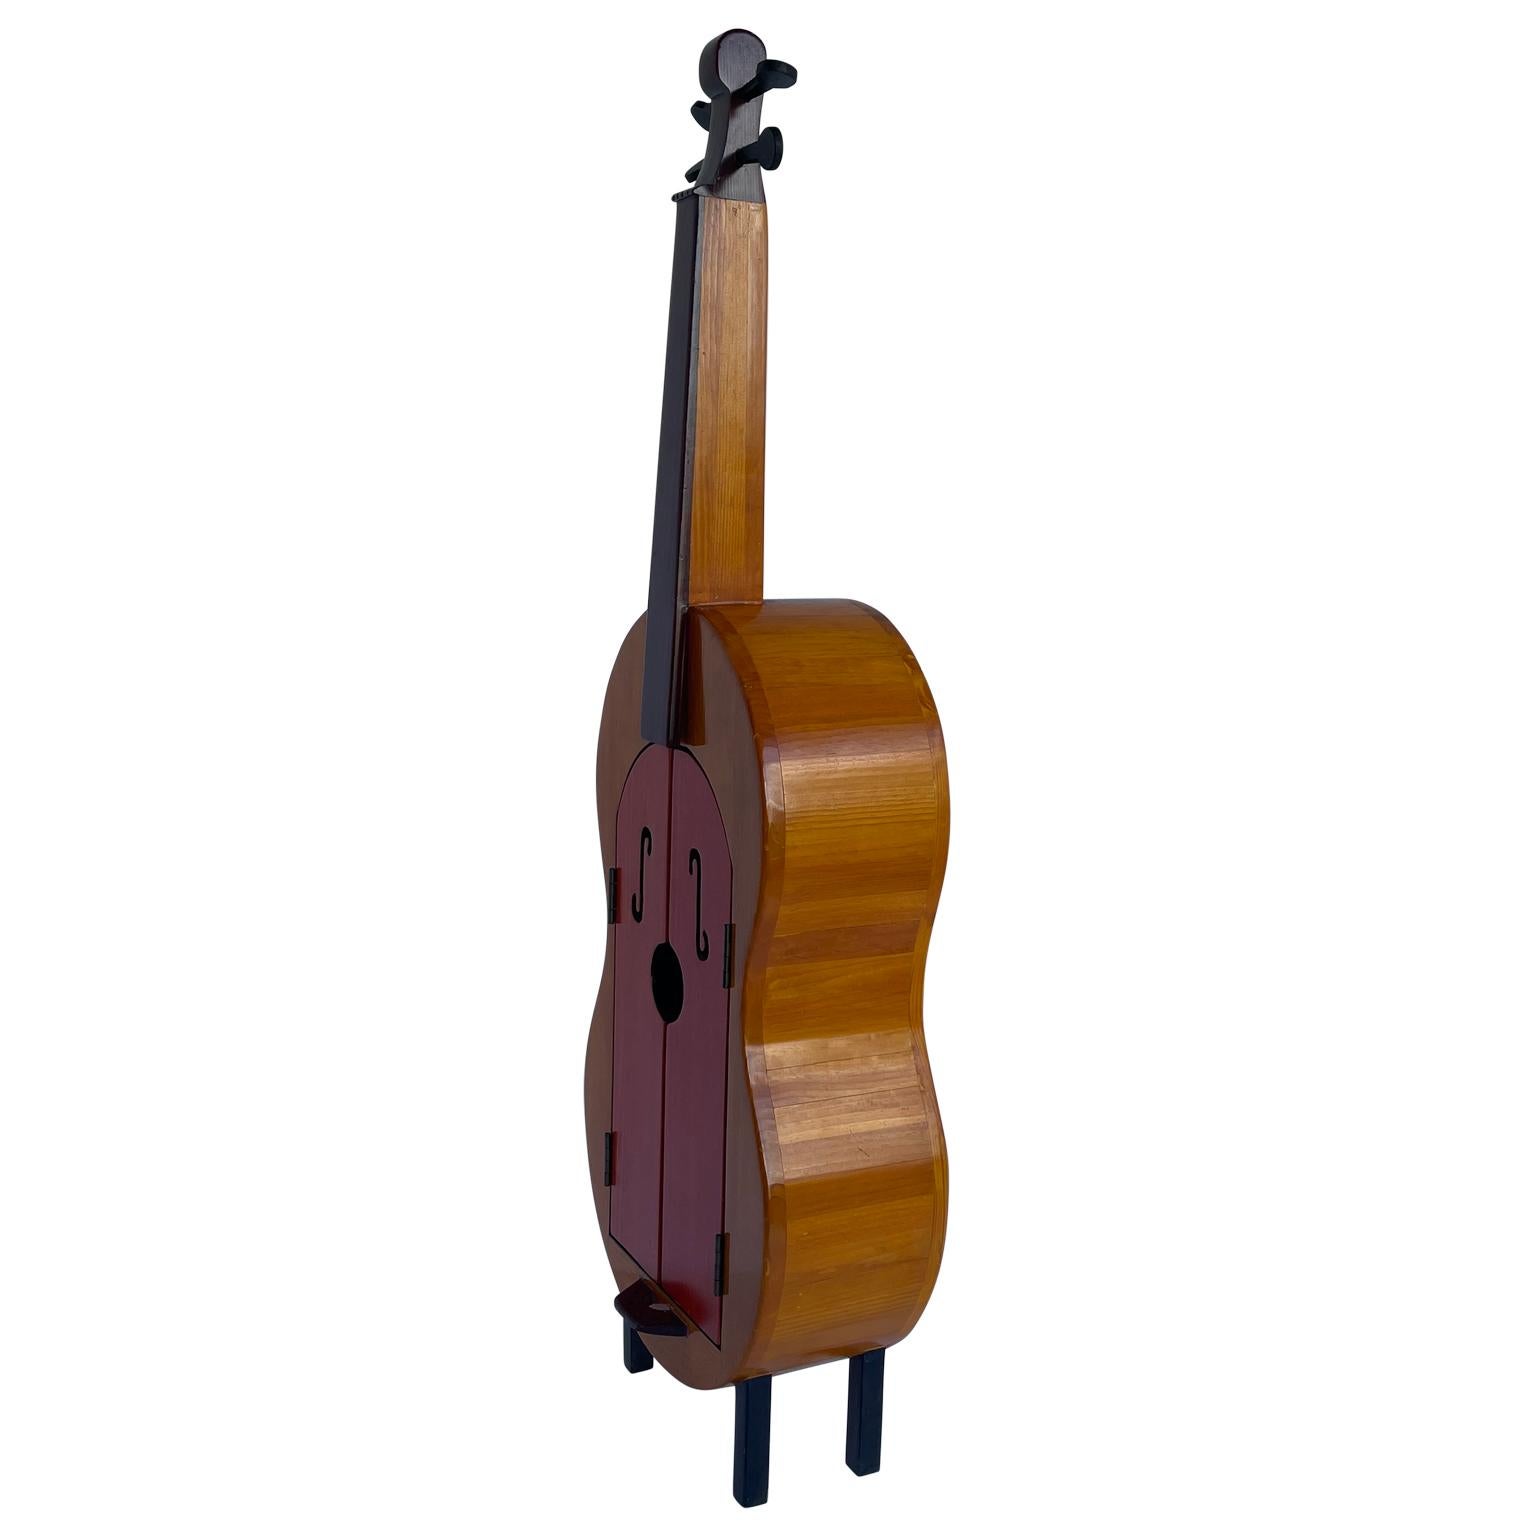 Vintage full size Cello cabinet with 6 shelves.
What a fun piece this is! The tall handsome Cello has so many functions; a dry bar, a bookshelf, a collectible display case, the list is endless. Red lacquered doors with decorative tempo design add